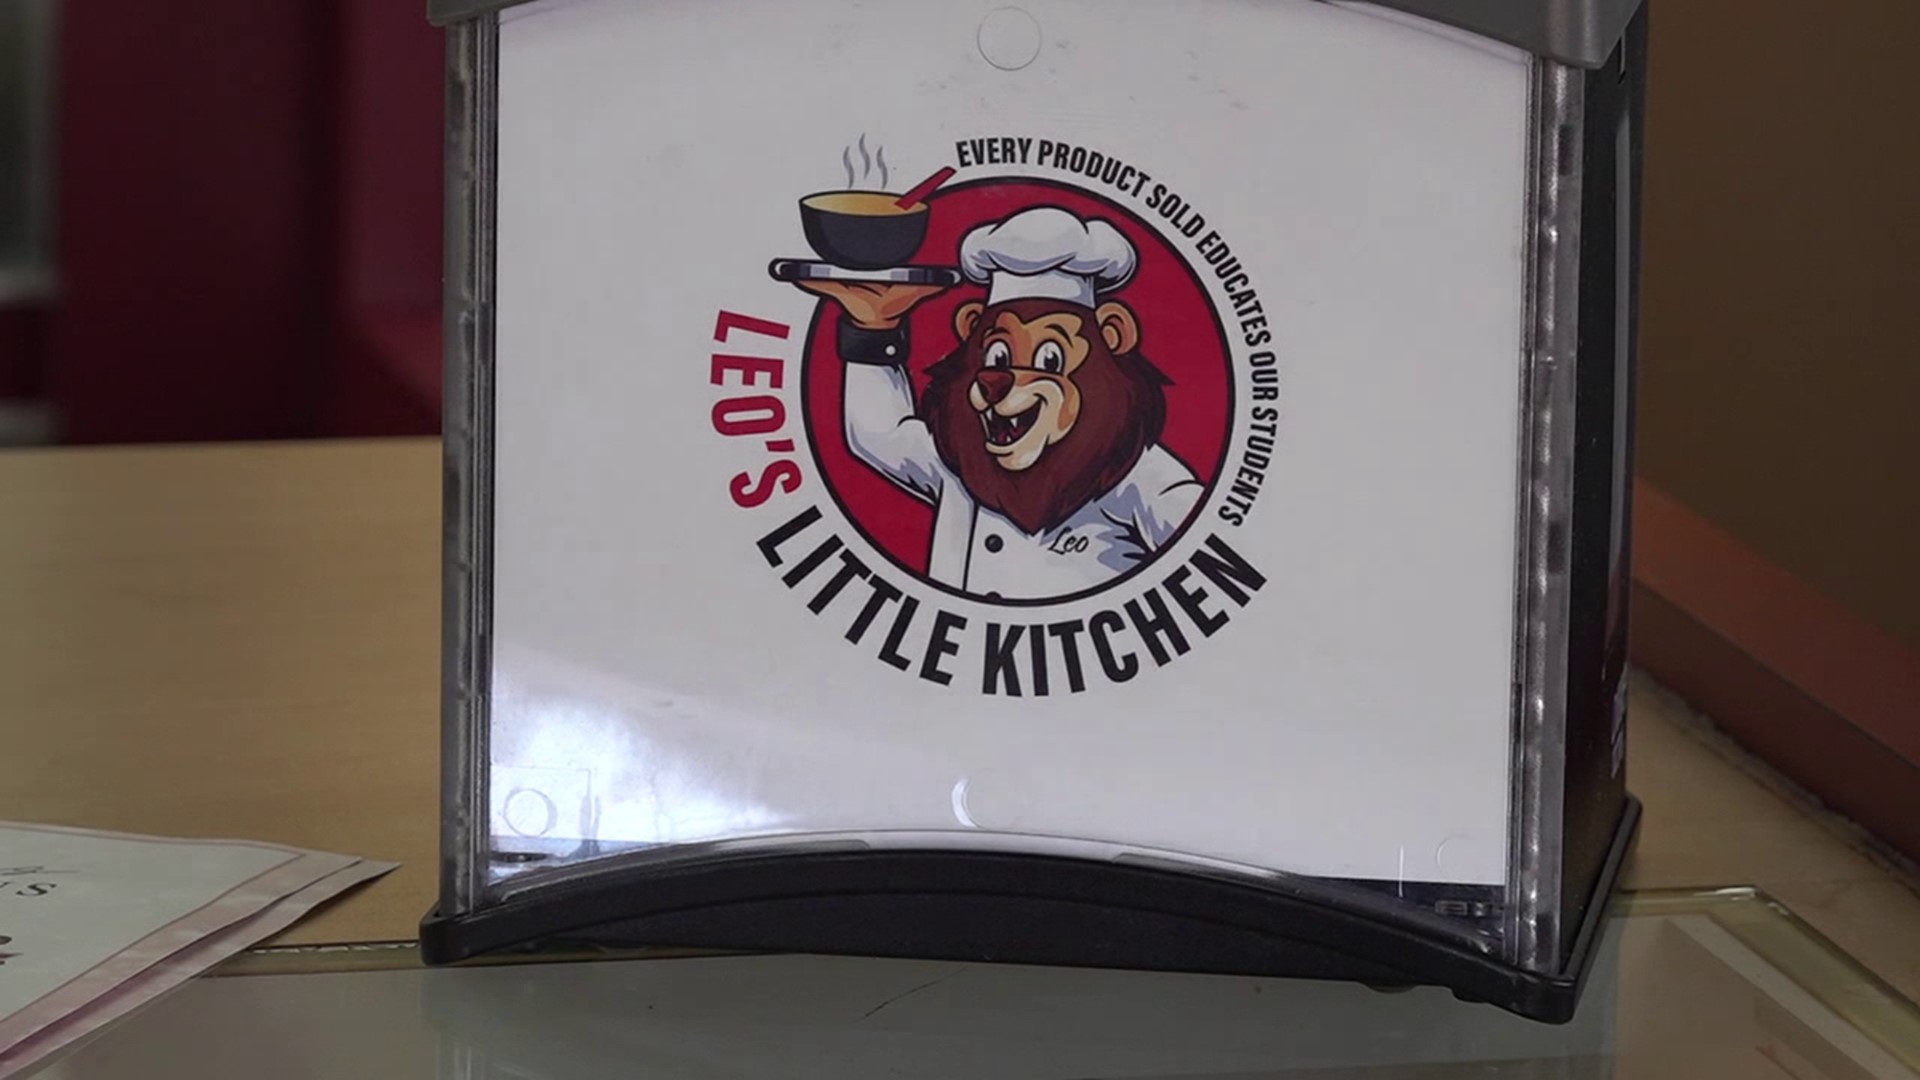 High school students are running Leo's Little Kitchen to help support tuition assistance for low-income students at Immanuel Christian School in Luzerne County.